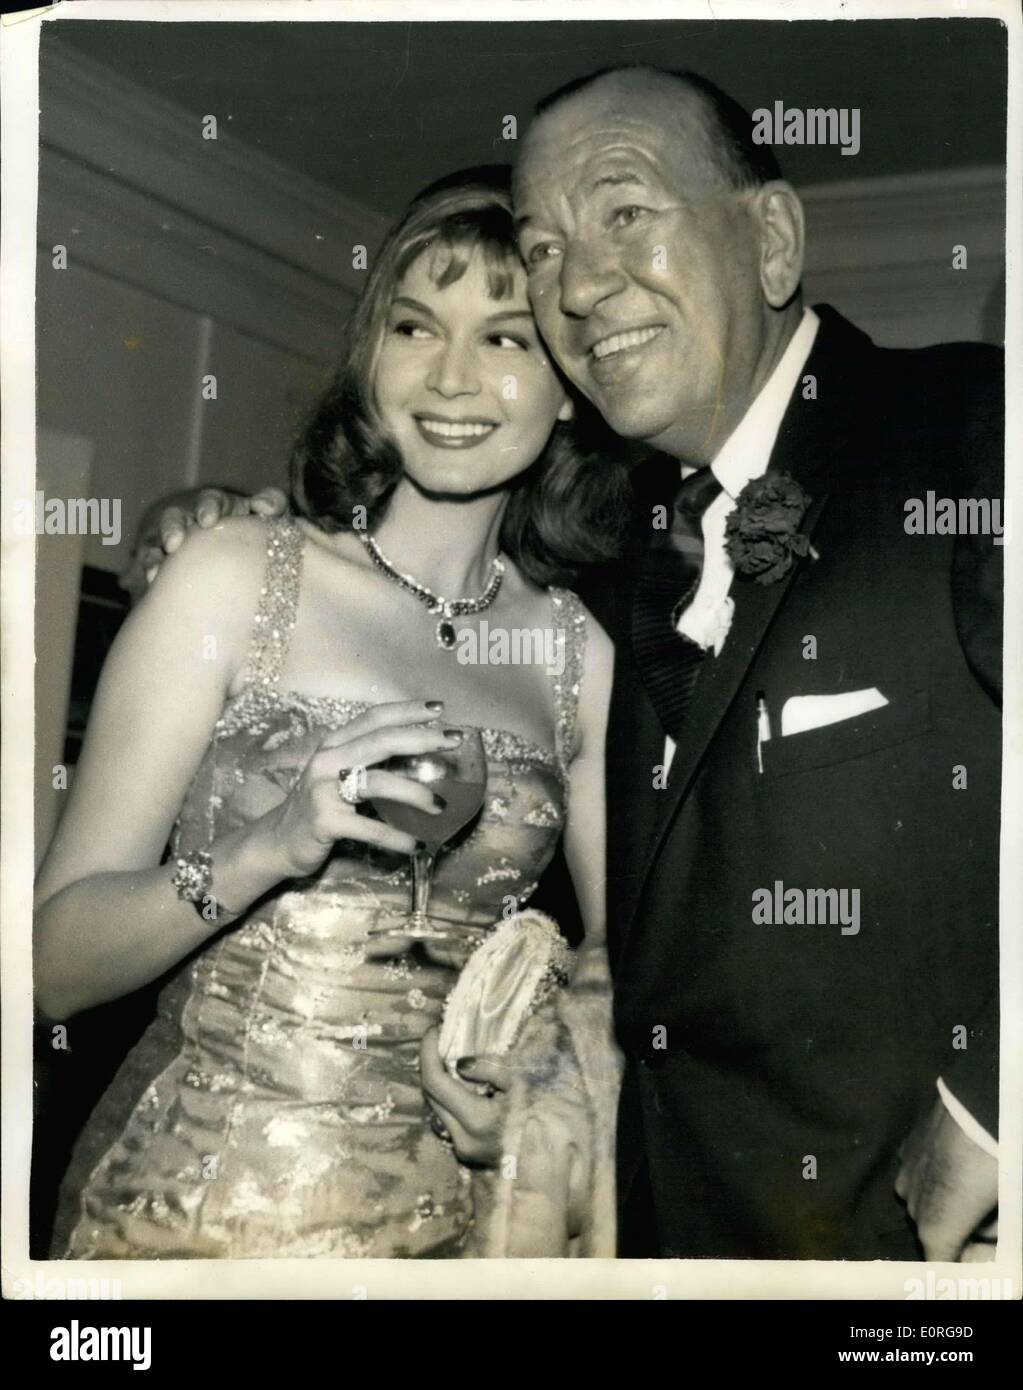 Jun. 24, 1959 - Cocktail Party for Stars of Charity Matinee, Noel Coward with Eva Bartok. A Cocktail party was held in Bloomsbury last night as a get together in readiness for the night of 100 stars, Charity Matinee, organized by Noel Coward. Keystone Photo Shows: Noel Coward with Eva Bartok at the party last night. Stock Photo